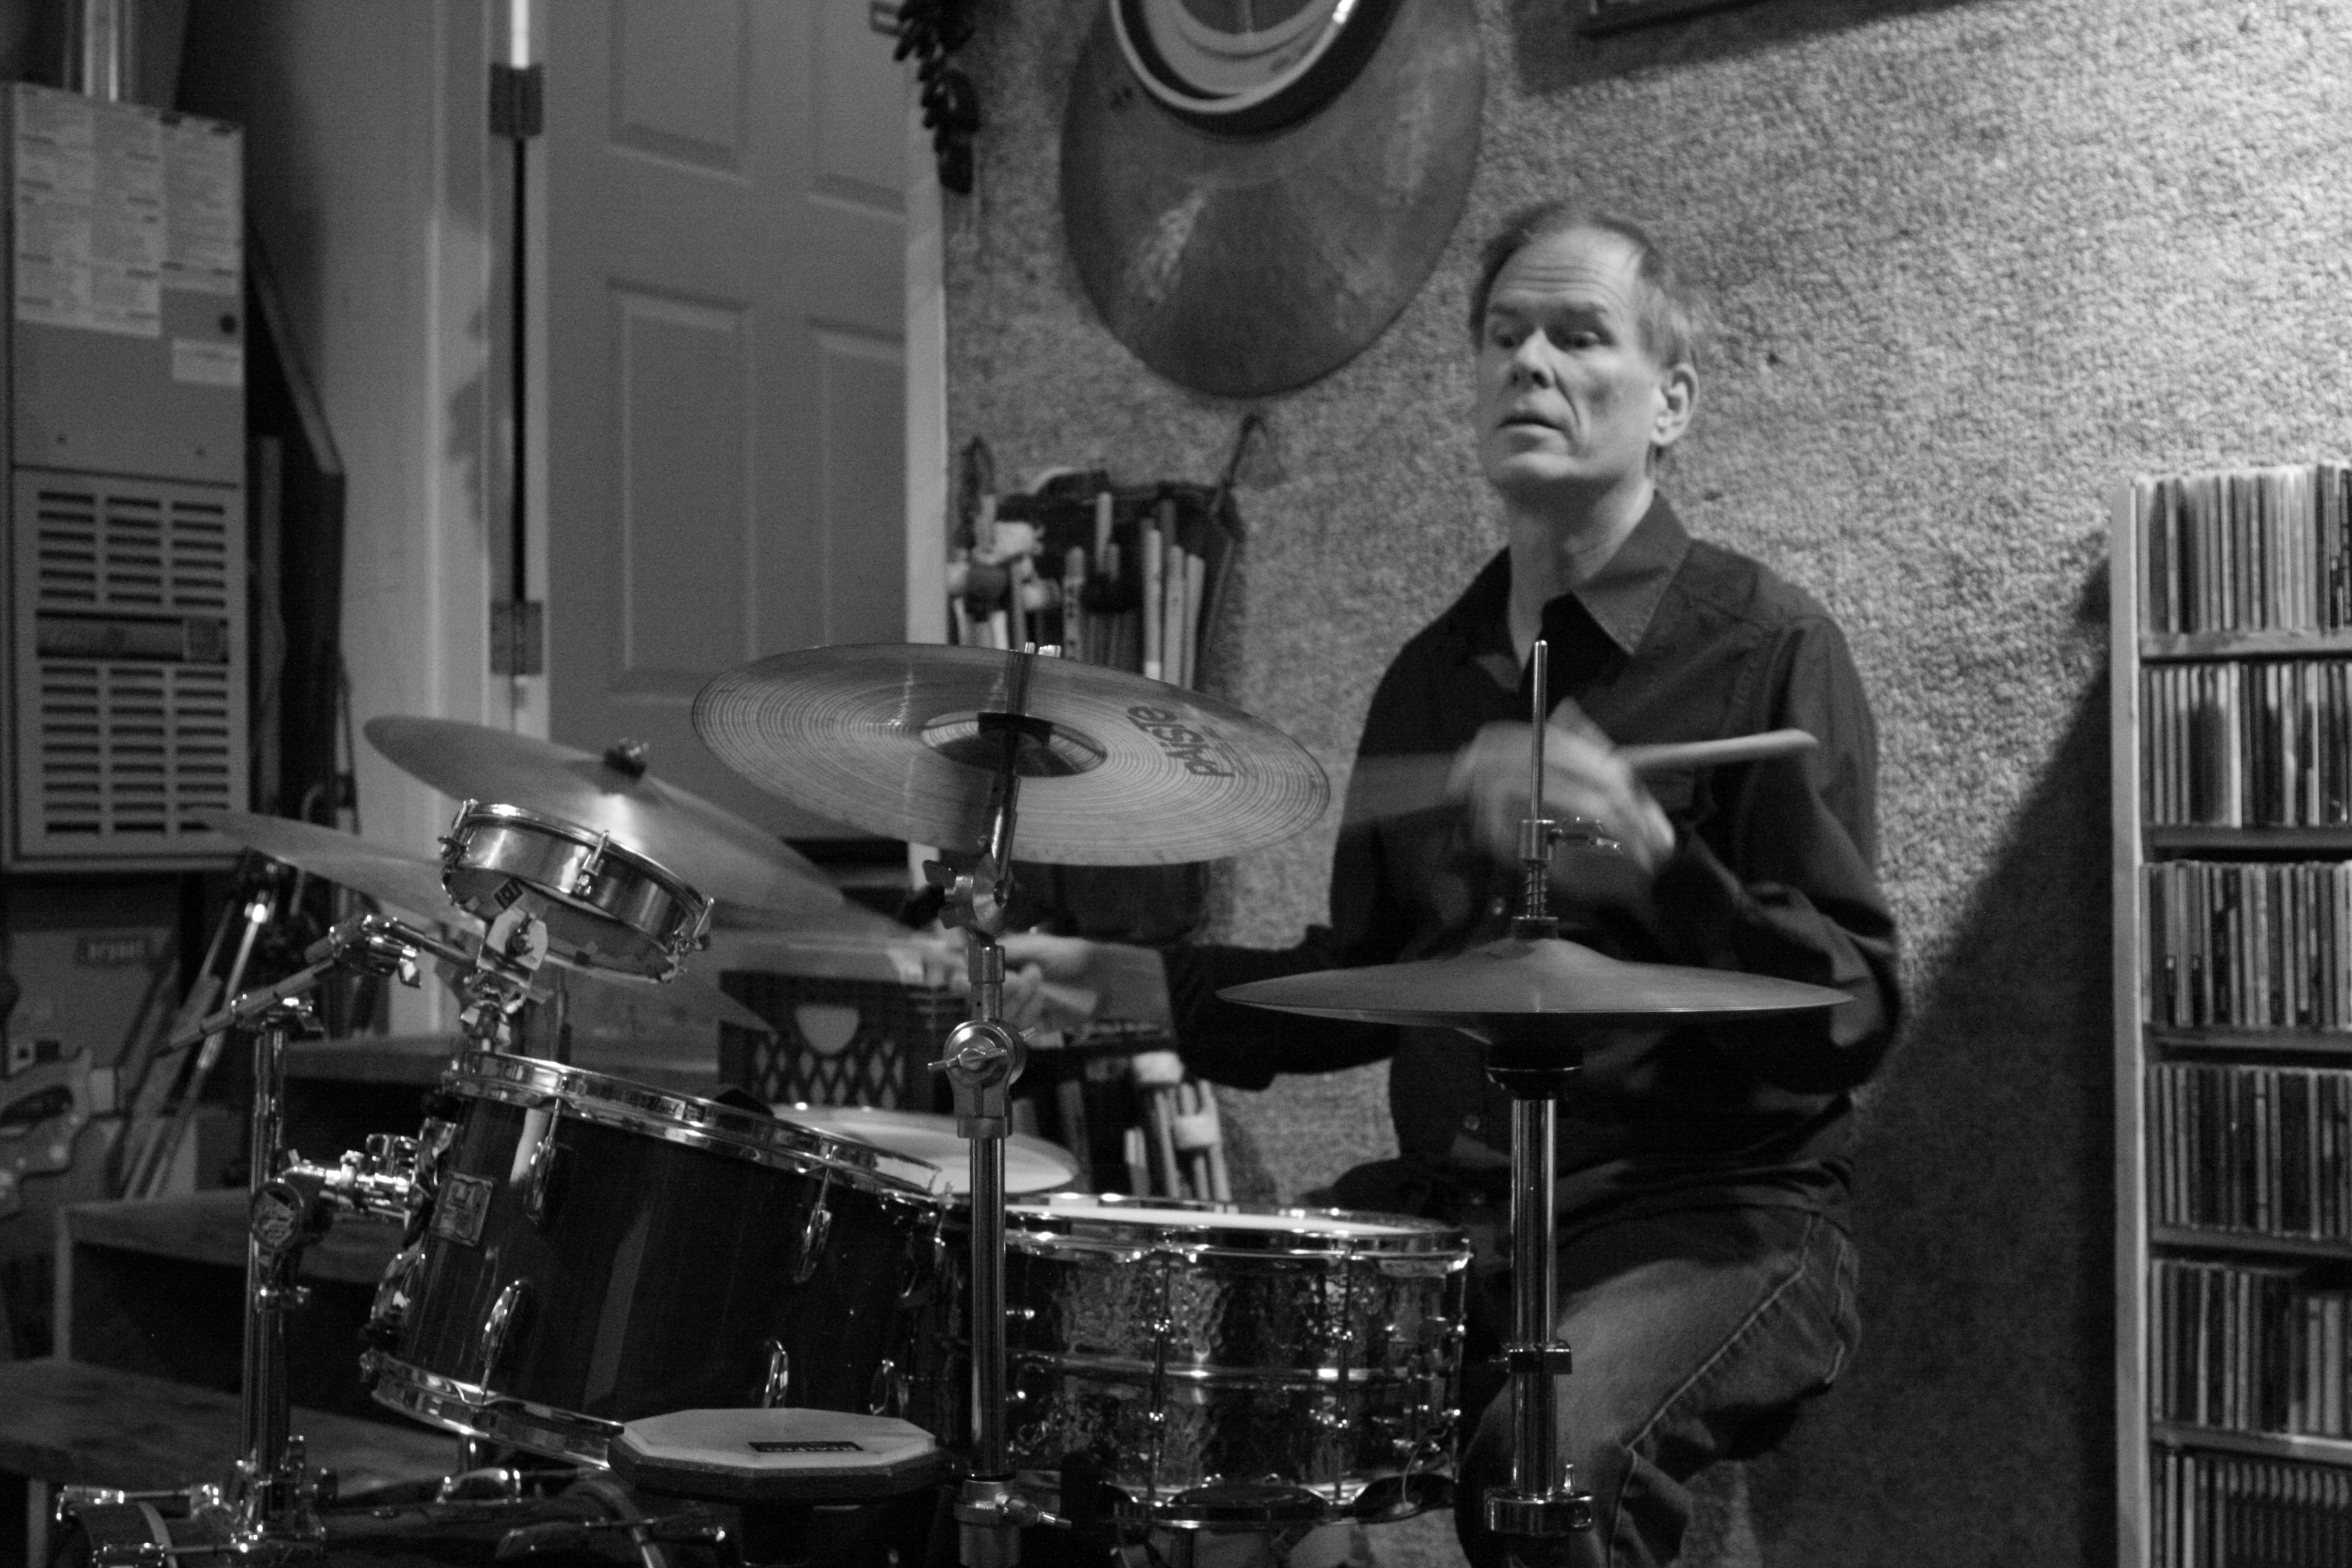 Kendrick Freeman playing drums in black and white